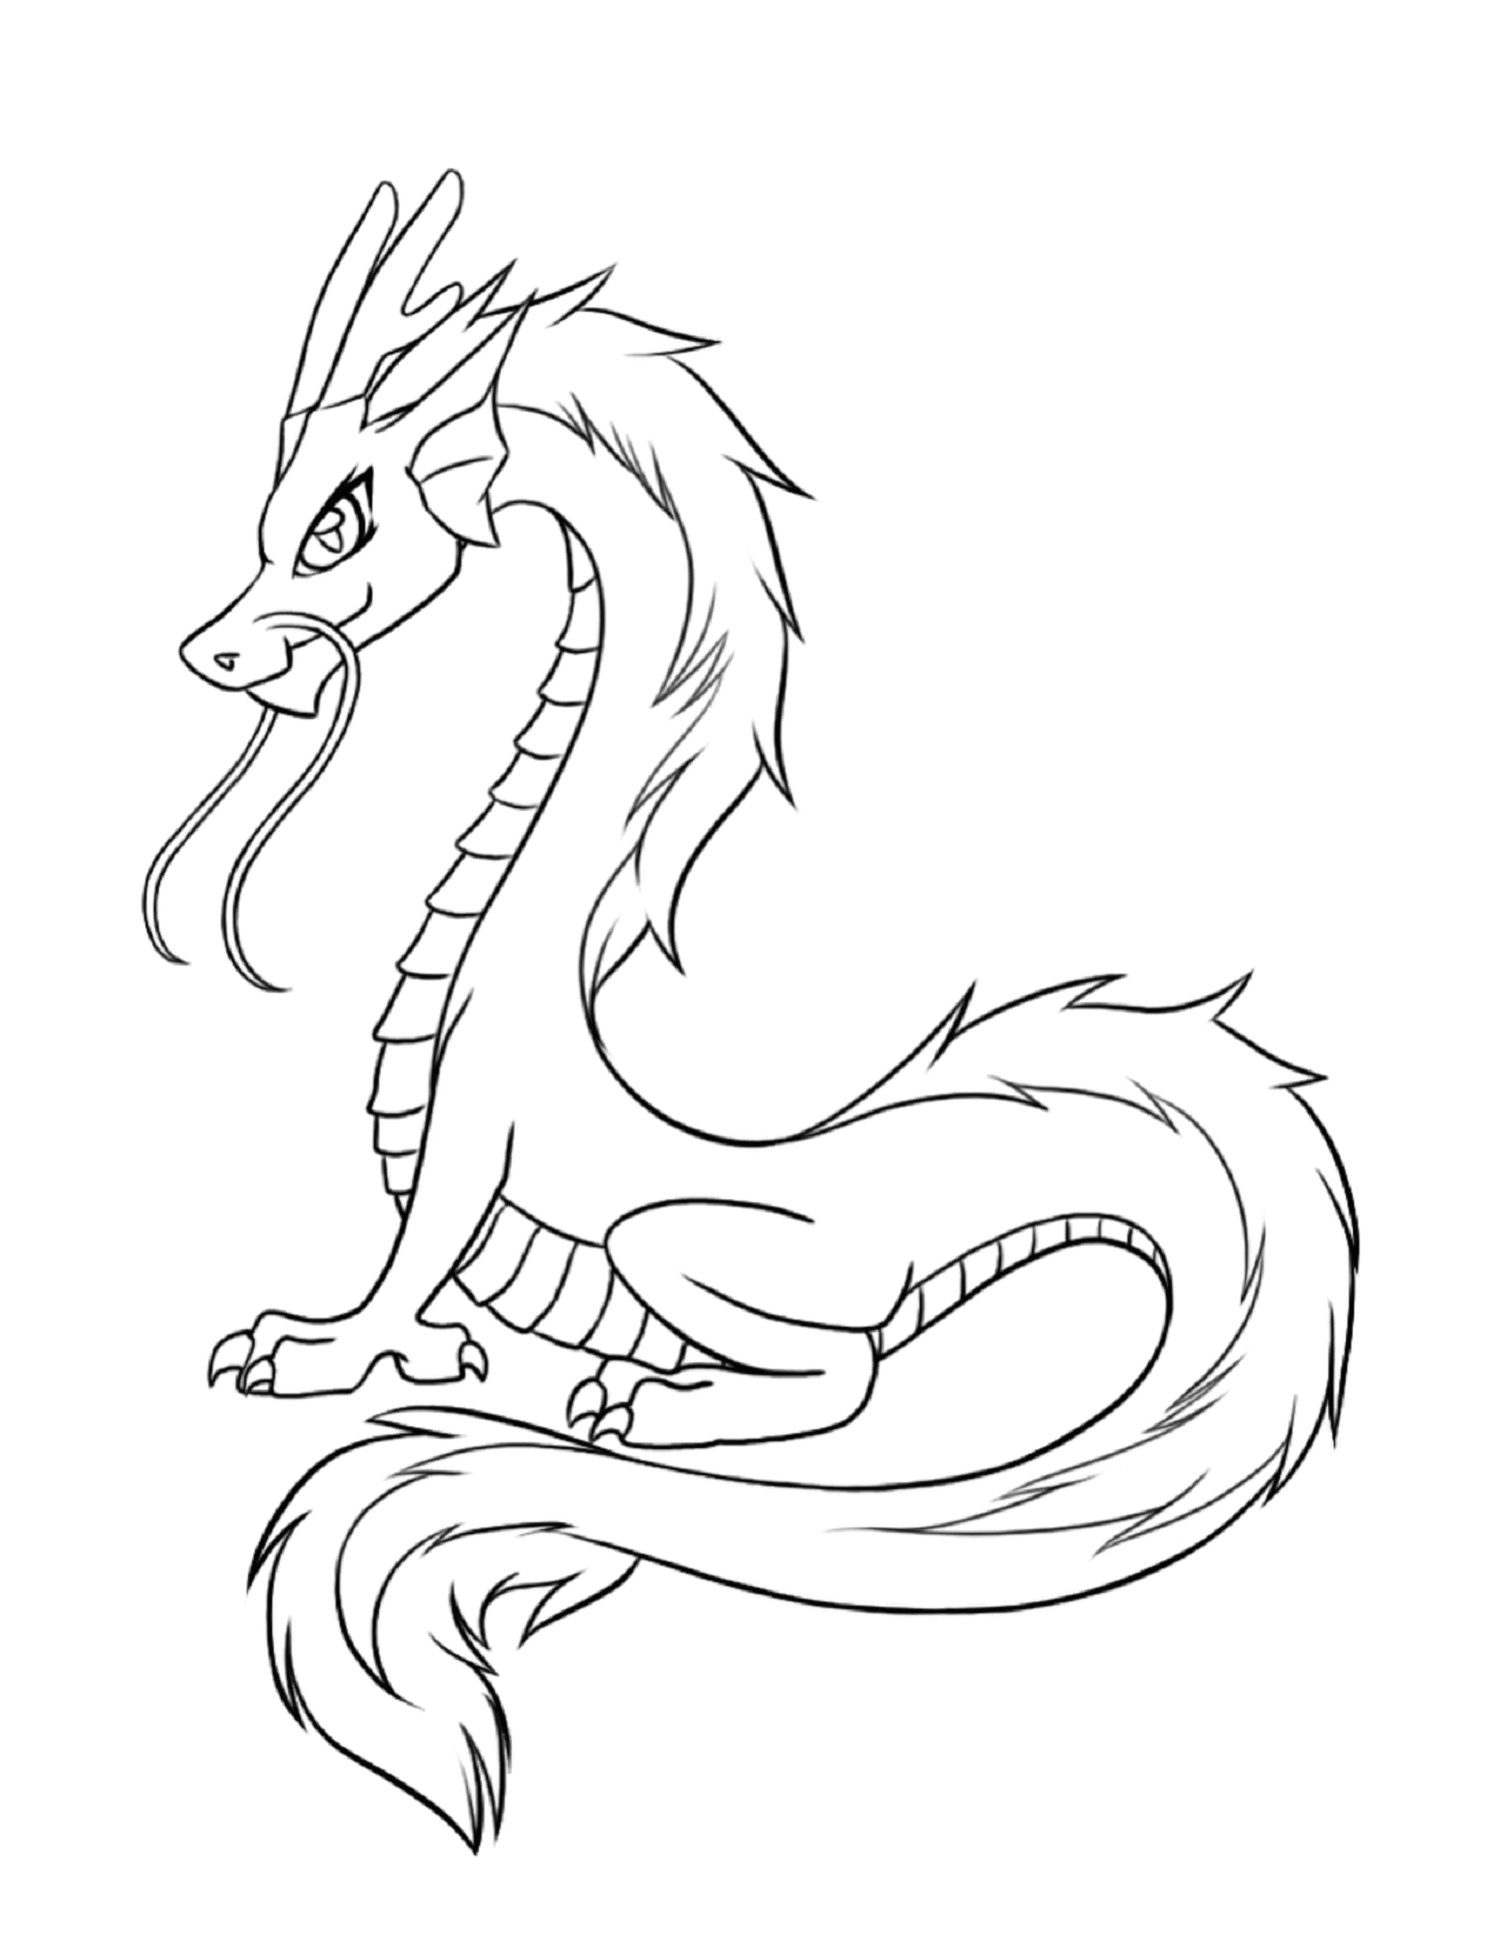 Drawings Of Baby Dragons Dragon Coloring Pages for Fun Coloring Kids Activity Coloring